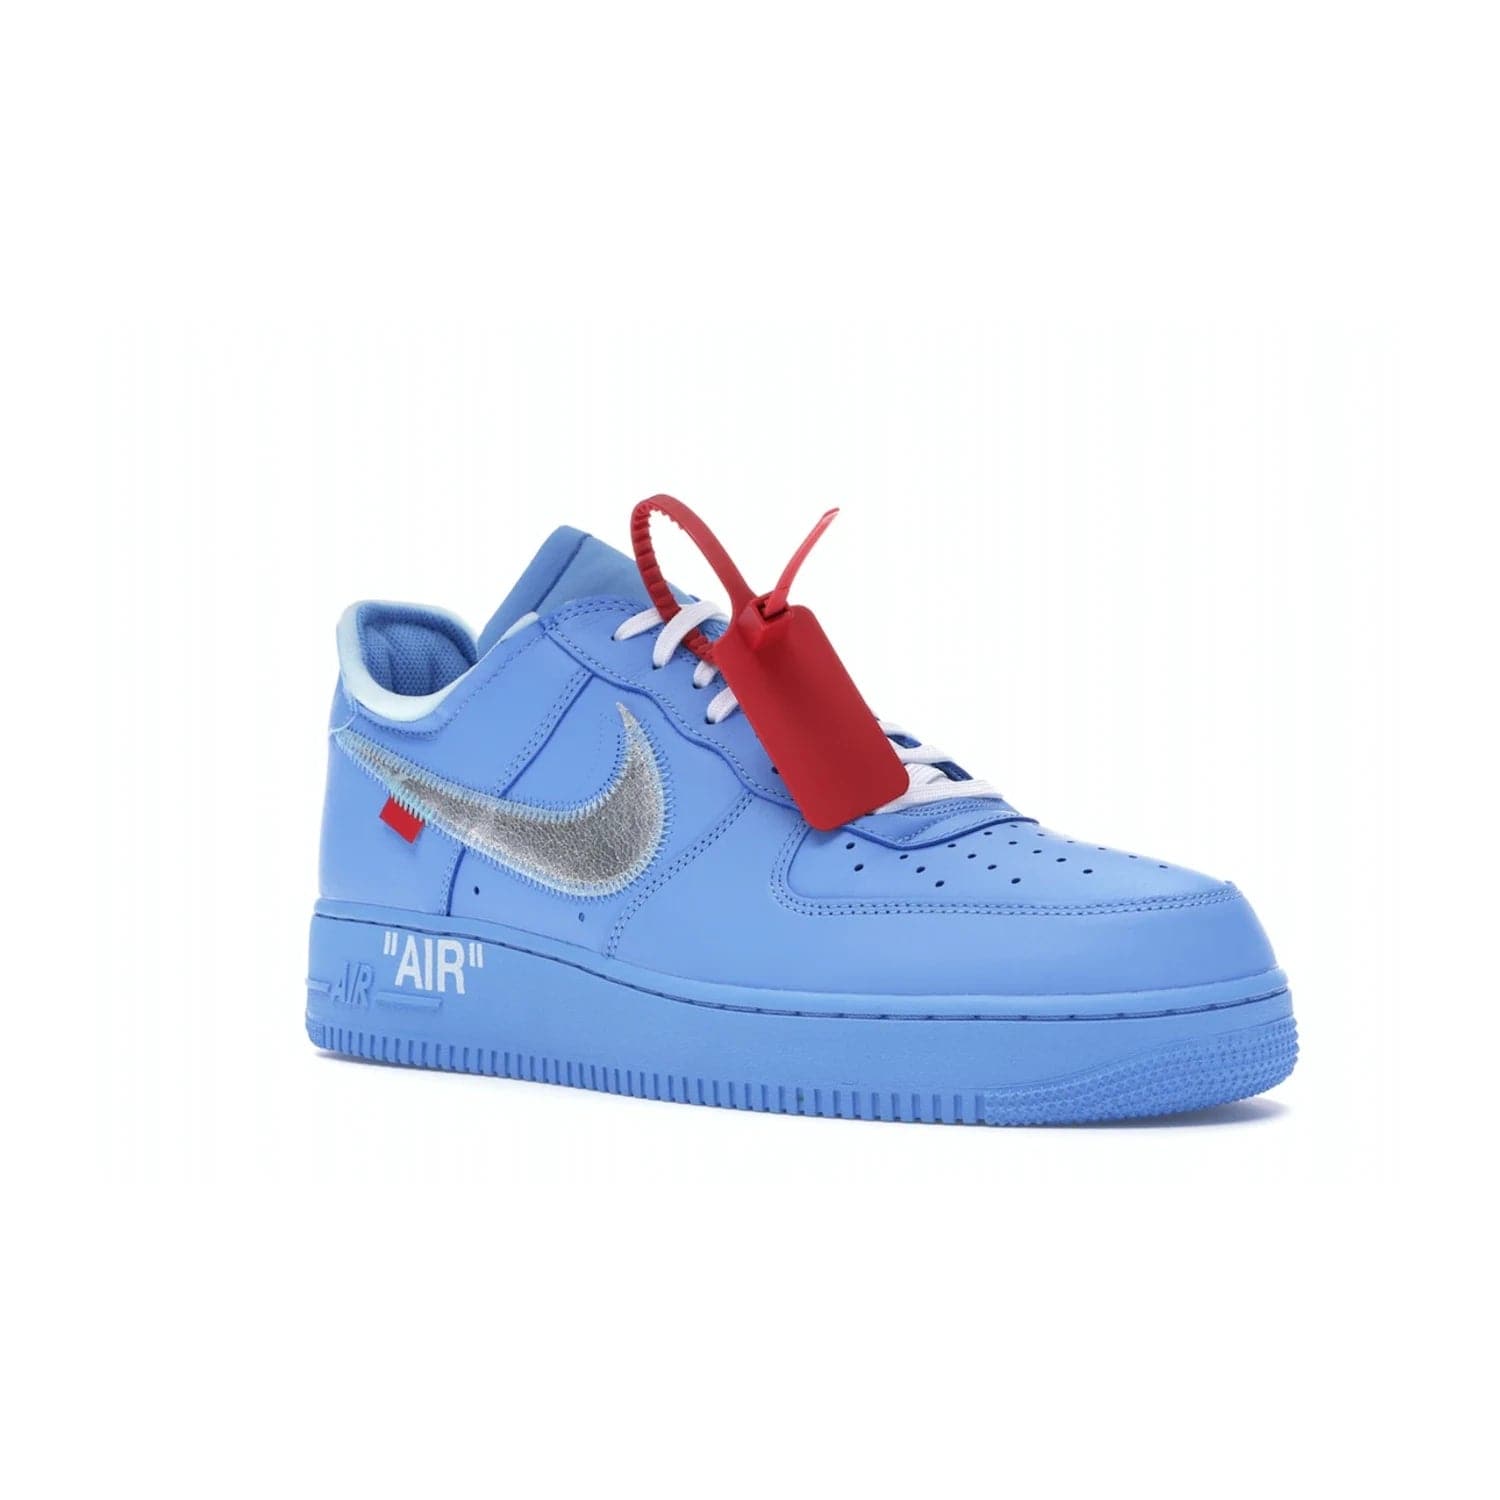 Nike Air Force 1 Low Off-White MCA University Blue - Image 5 - Only at www.BallersClubKickz.com - Virgil Abloh's Air Force 1 Low Off-White MCA University Blue: Features University Blue leather and midsole, reflective silver Nike Swoosh, red zip tie, white laces, and iconic Off-White™ branding. A must-have for any Virgil Abloh enthusiast.